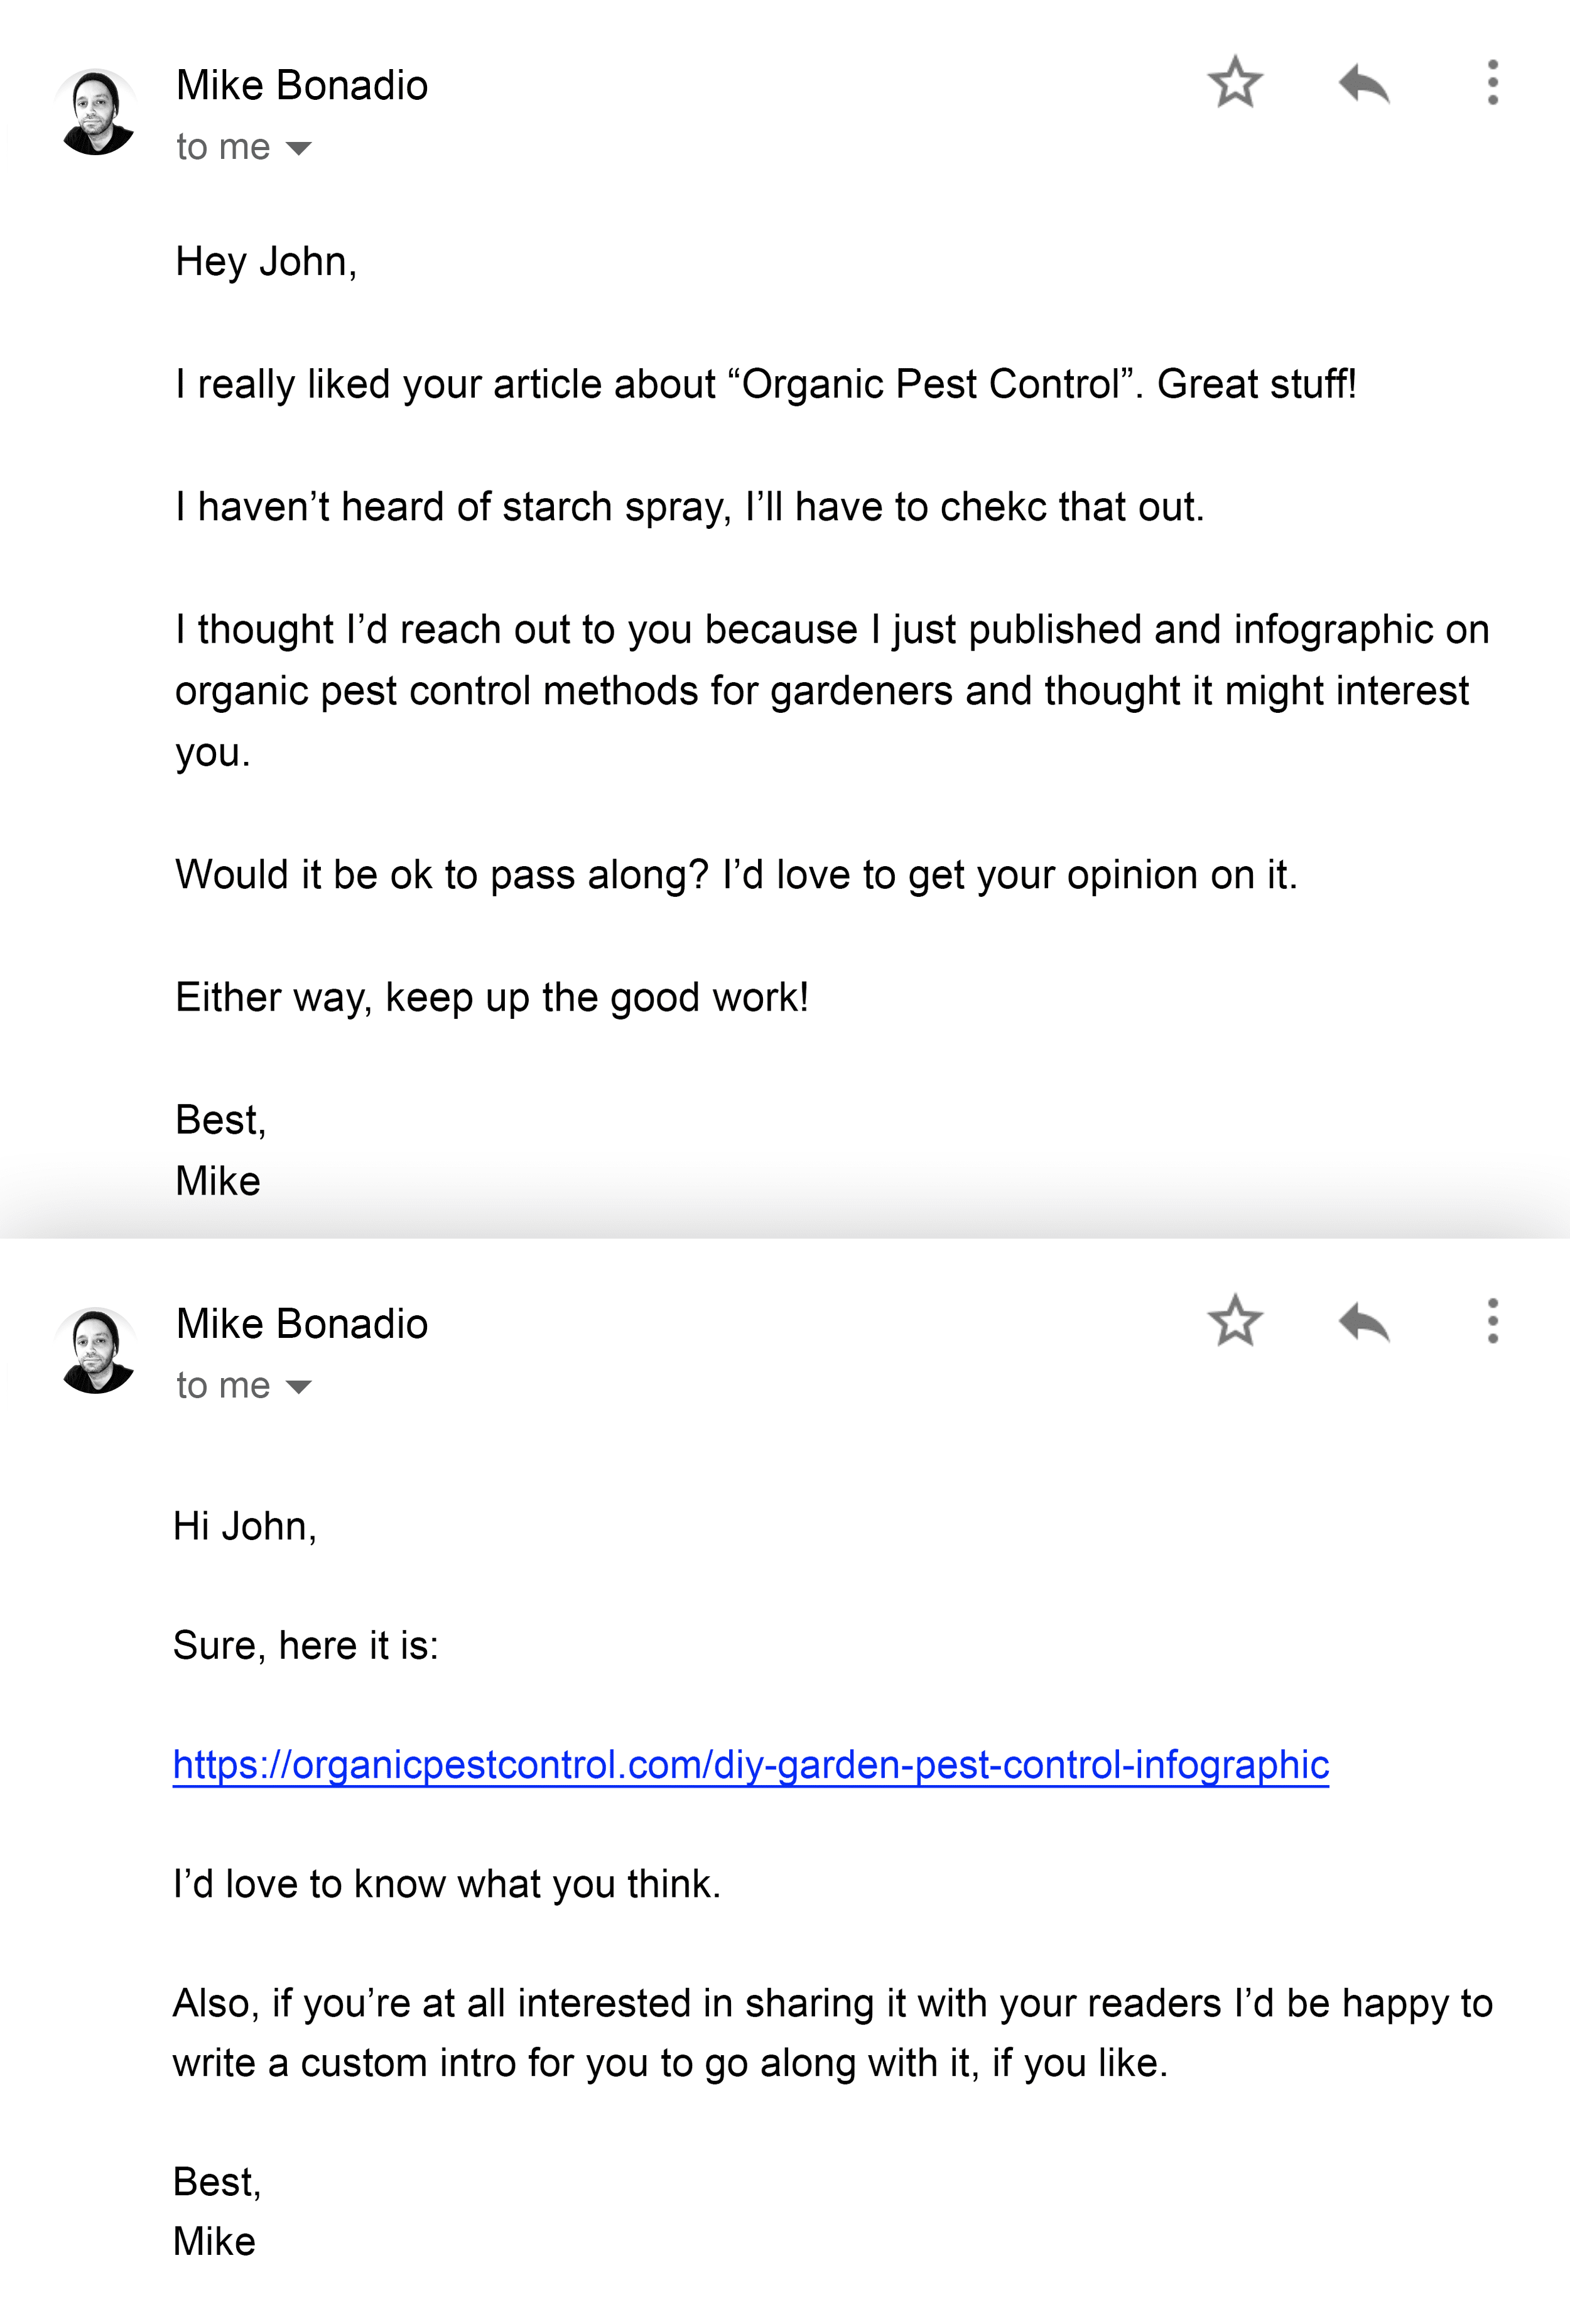 Mike outreach and reply email